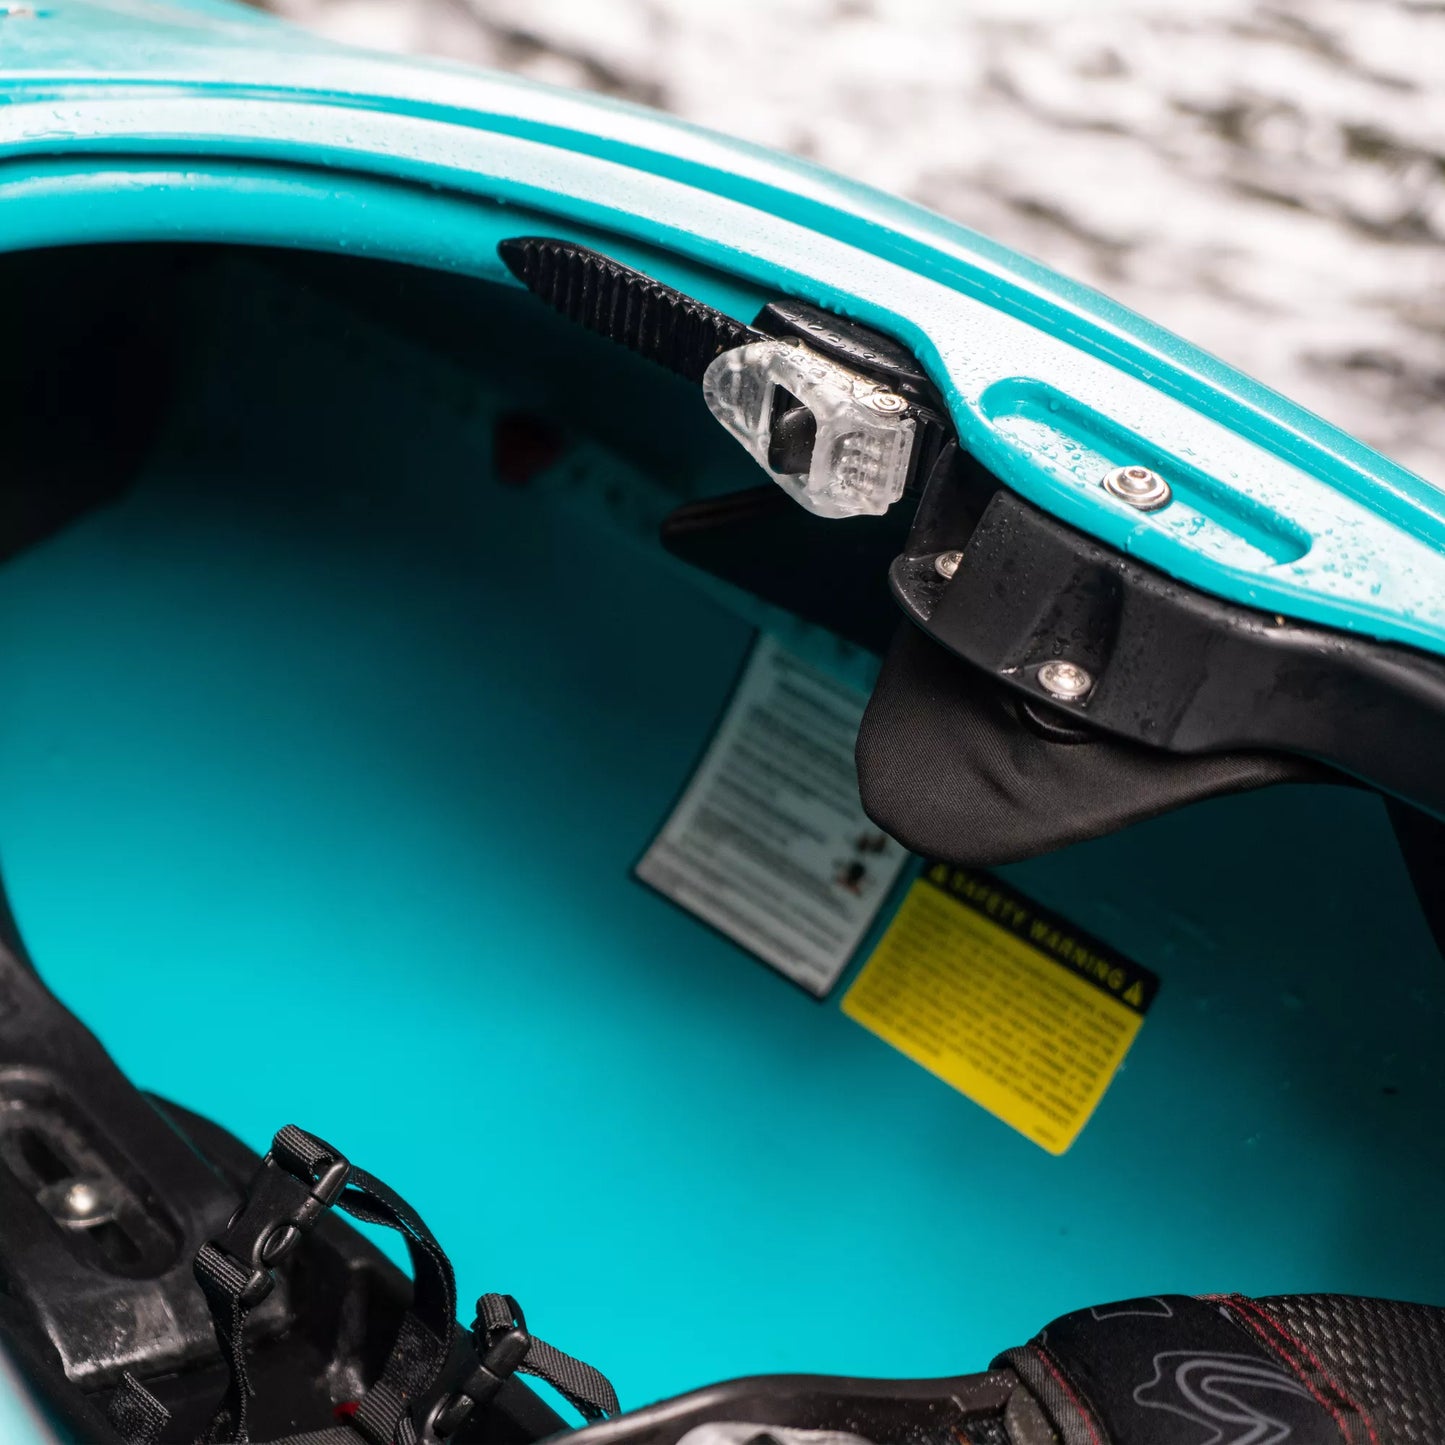 Close-up of a blue Dagger Phantom race kayak's cockpit with foot pedal and safety instructions visible.